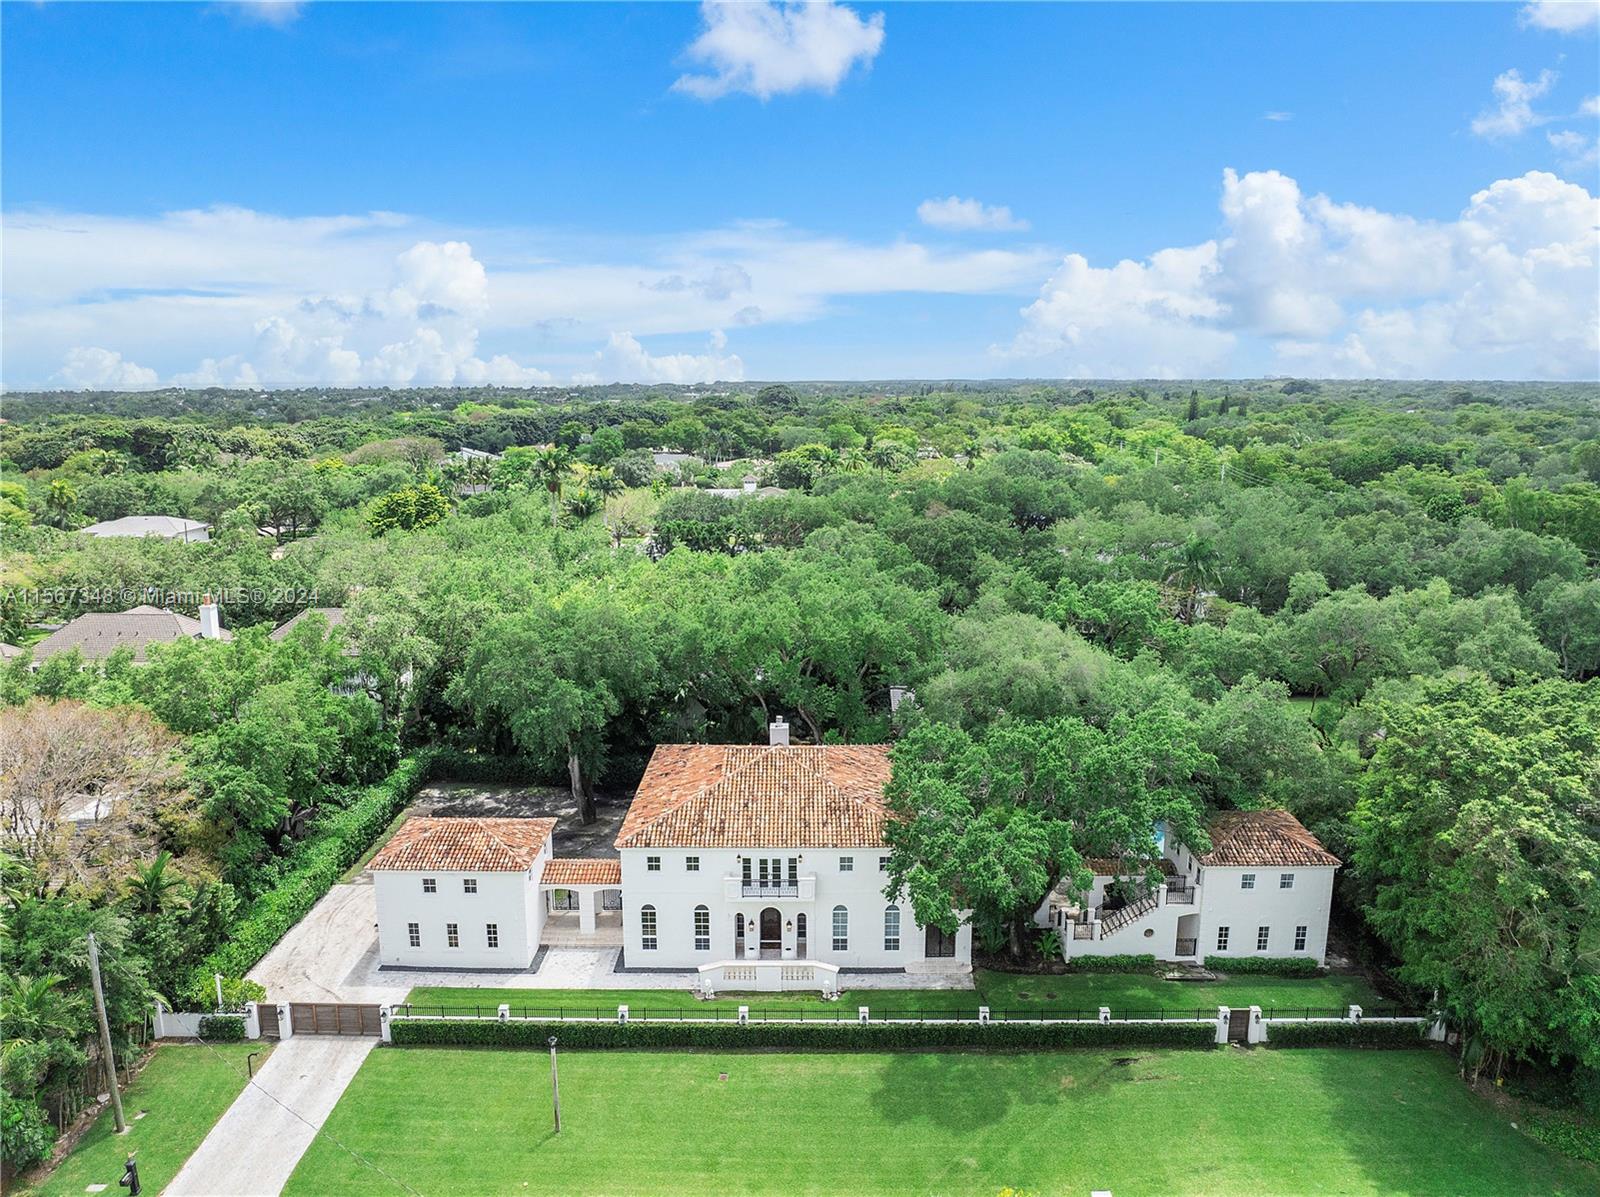 Step into the refined world of French architecture with this stunning Coral Gables home. You are welcomed by a grand foyer, modern double-sided fireplace, wood floors throughout, coffered ceilings and an elegant curved staircase. The spacious living areas and formal dining, featuring 14-foot ceilings and a gorgeous open kitchen, are filled with natural light streaming through expansive windows. A warm family room completes the cozy yet elegant atmosphere. Outside, the oasis attracts with covered terraces, open-air patios and salt-pool for relaxation & luxury. Main suite is a sanctuary with large walk-in closets and sophisticated bath. Unique fully renovated property is a collection of interconnected structures connected by breezeways. Smart-house system for audio/visual/lighting & home Gym